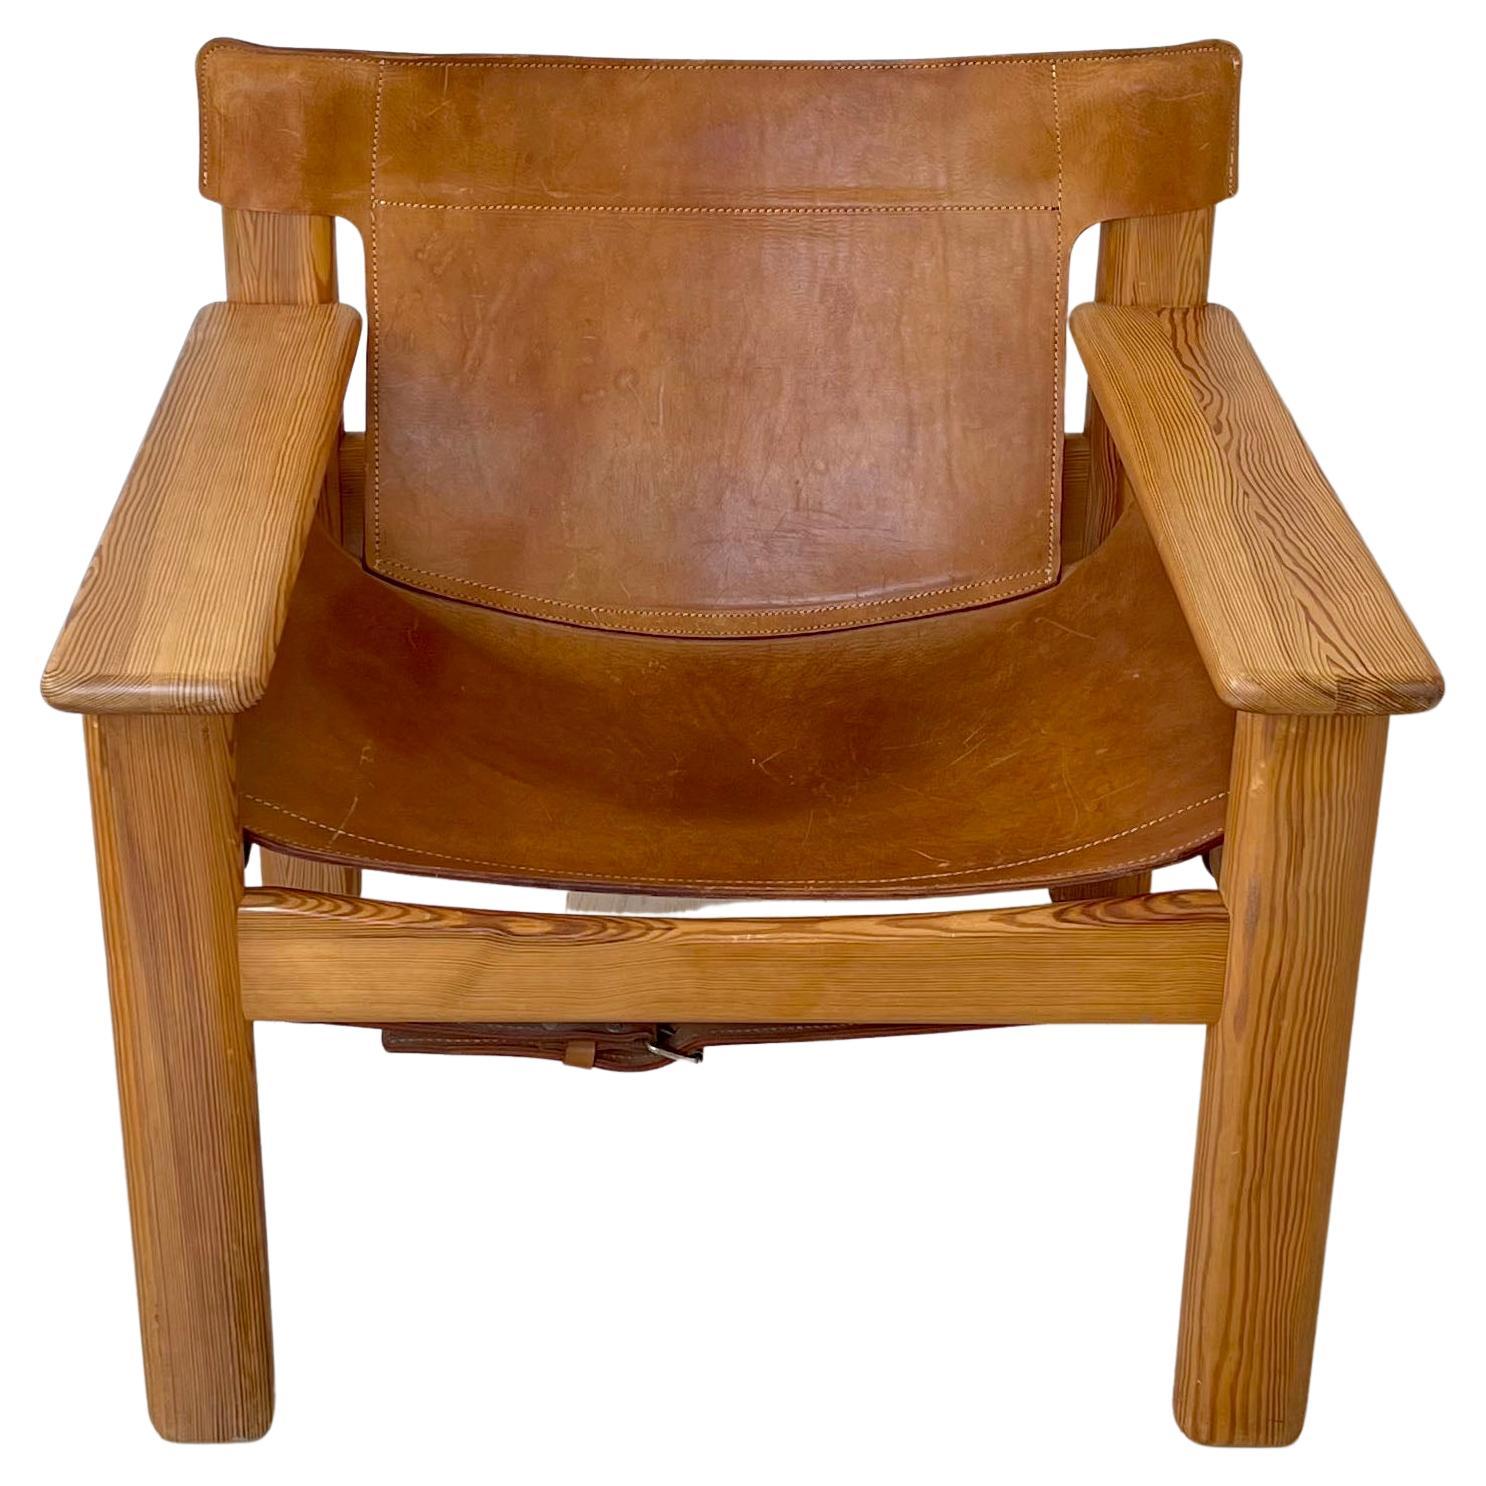 1970s Karin Mobring for Ikea Leather "Natura" Chair, Pine Frame